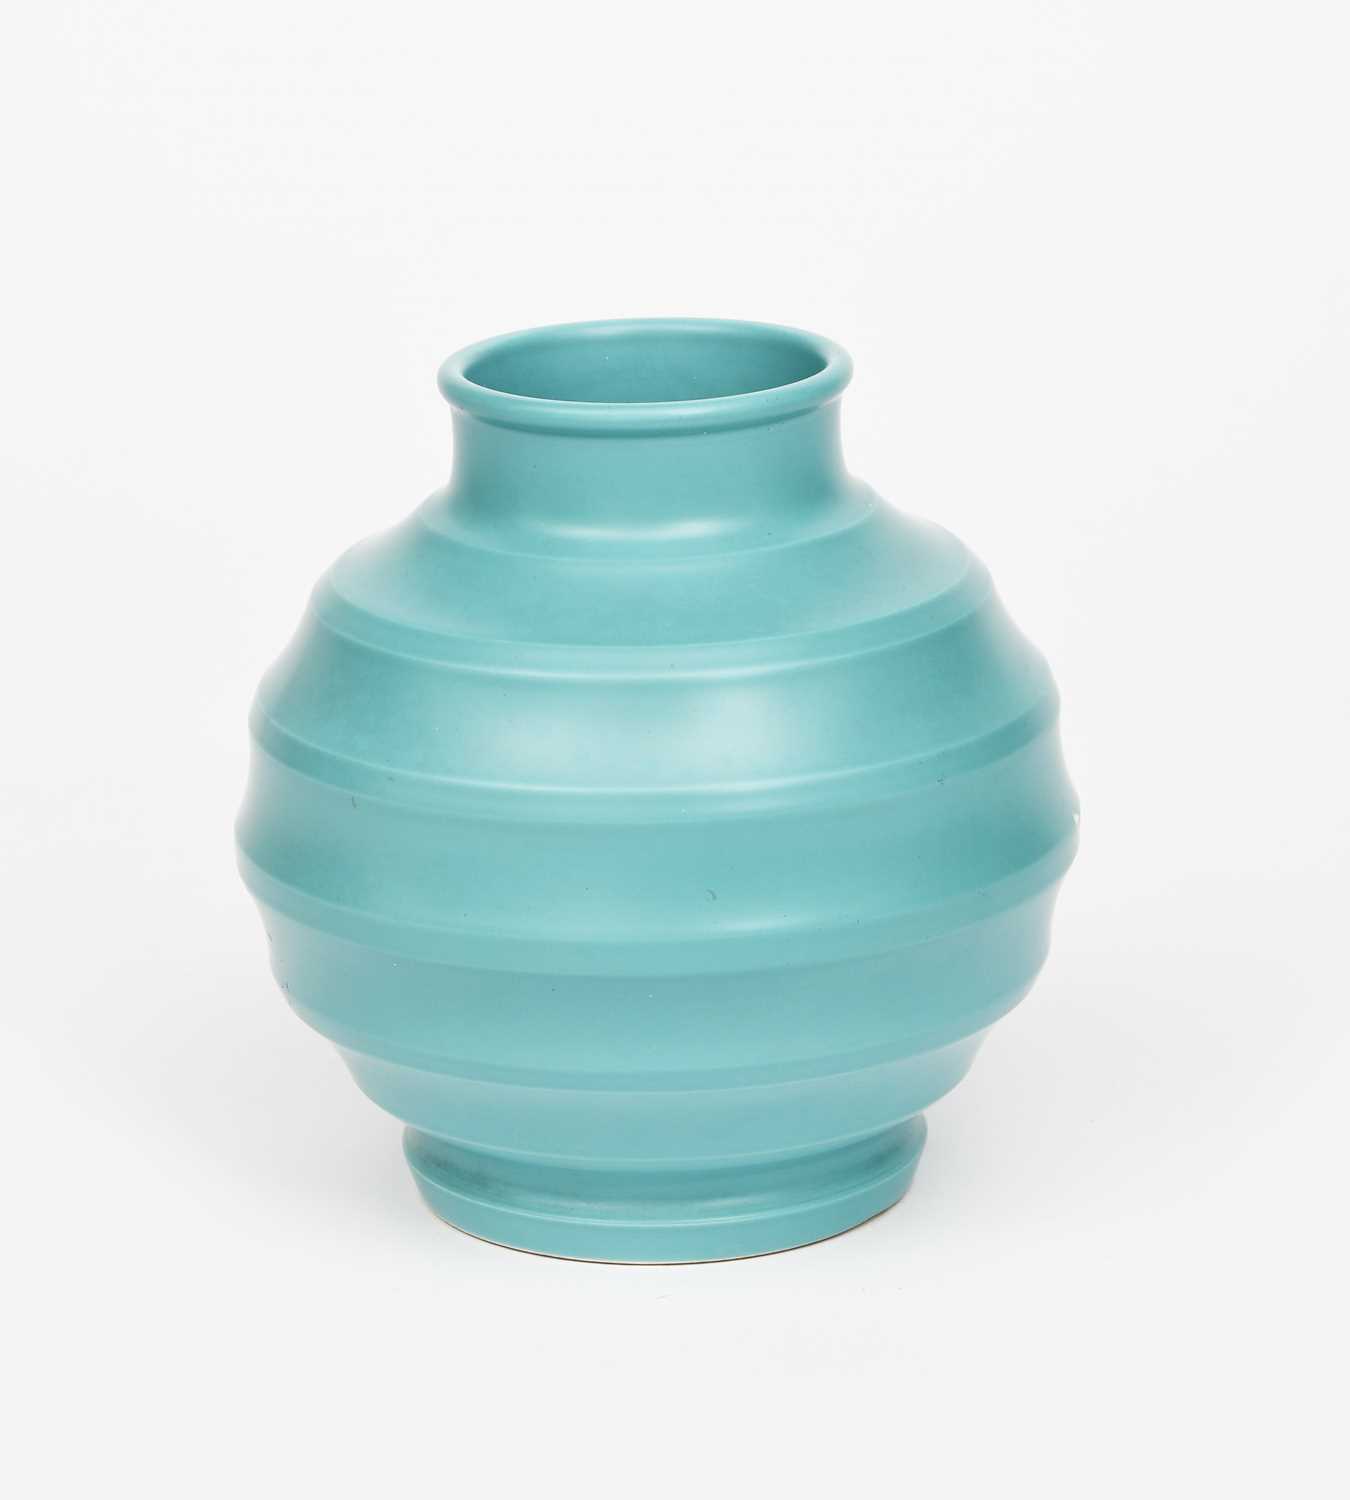 A Wedgwood Pottery vase designed by Keith Murray, ribbed, ovoid form with collar rim, covered in a